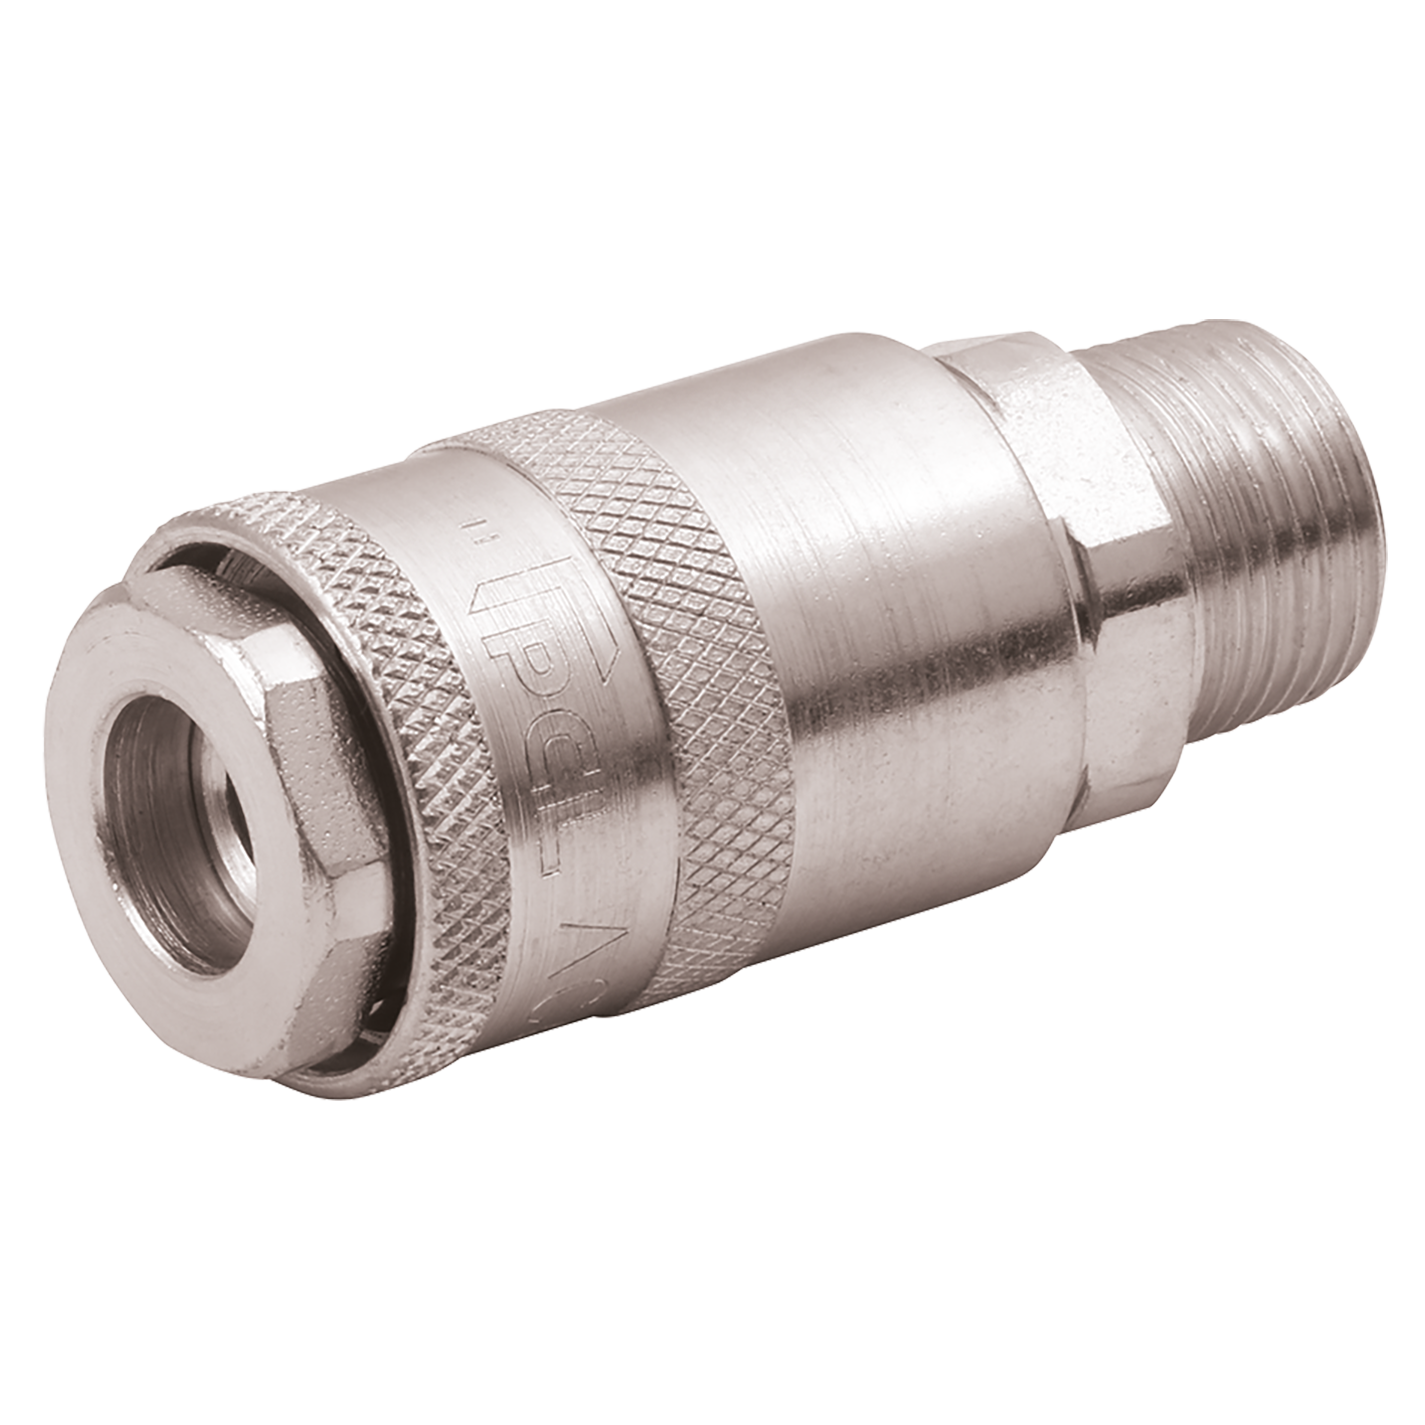 1/2" BSPT Male Euro Coupling